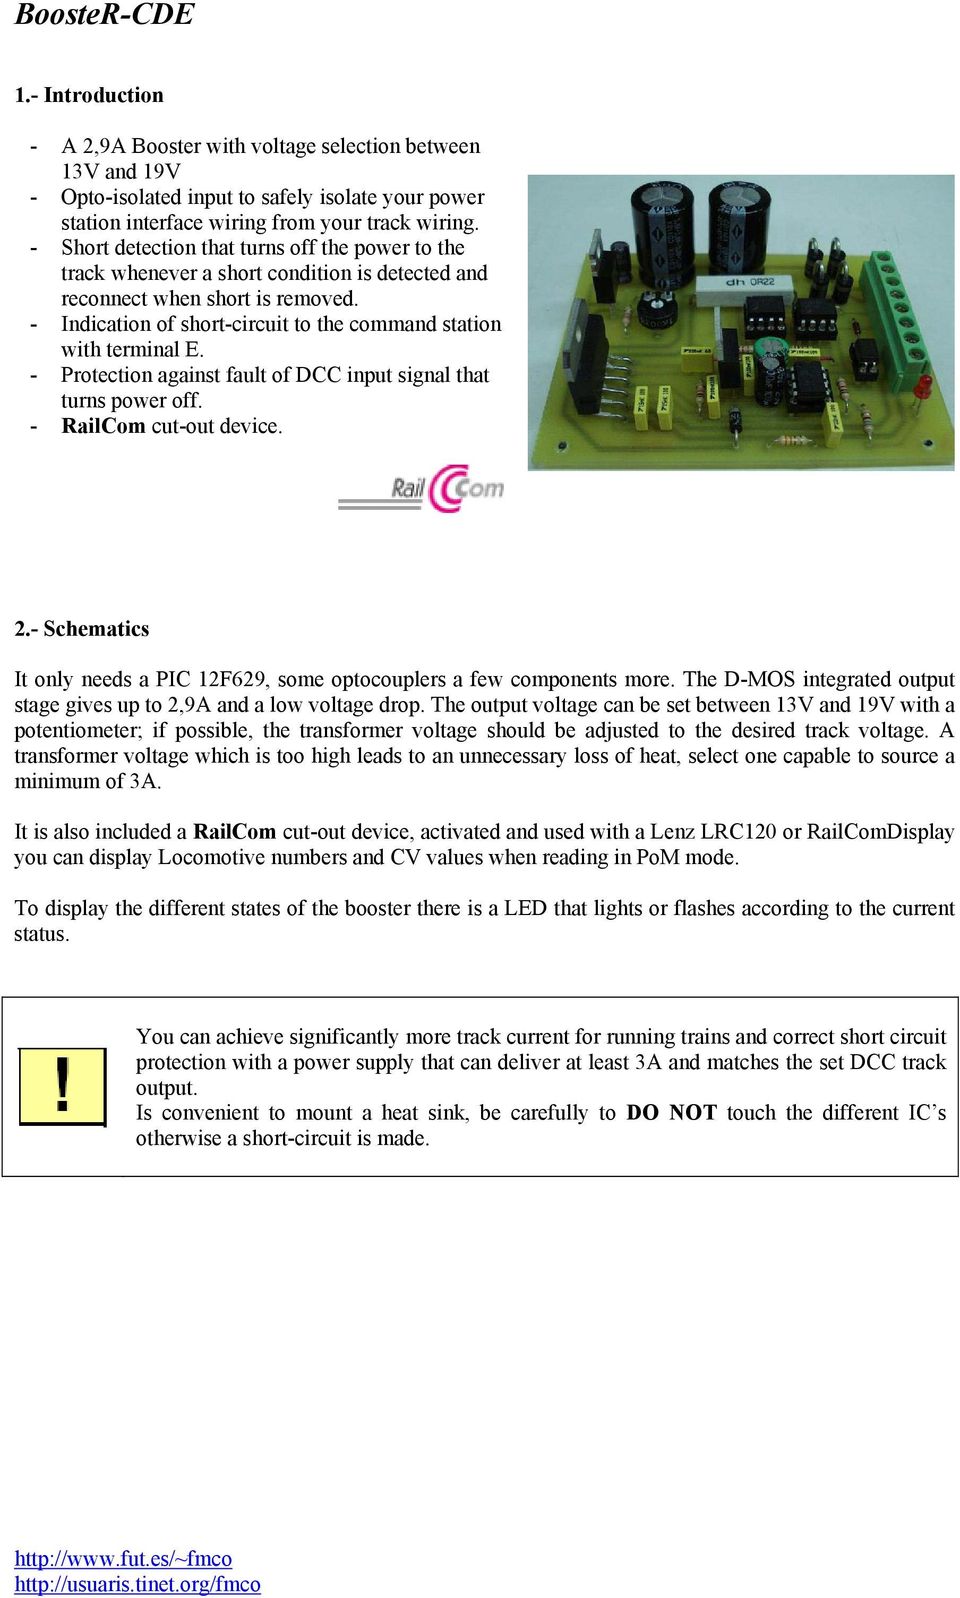 - Indication of short-circuit to the command station with terminal E. - Protection against fault of DCC input signal that turns power off. - RailCom cut-out device. 2.